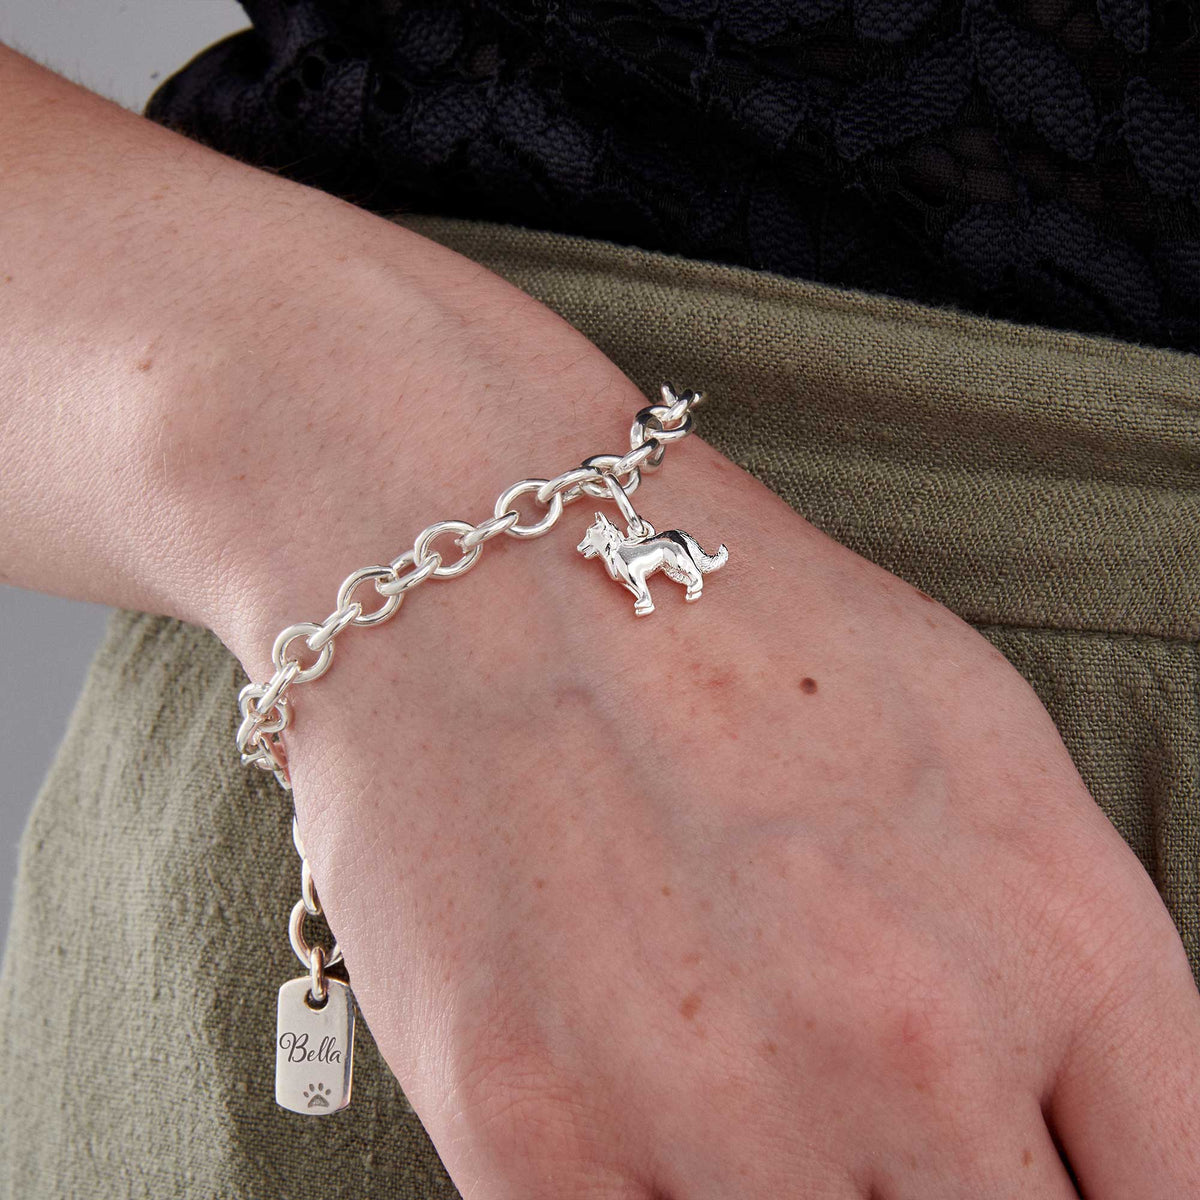 border collie solid silver charm bracelet made in the UK with personalised engraved dog tag scarlett jewellery